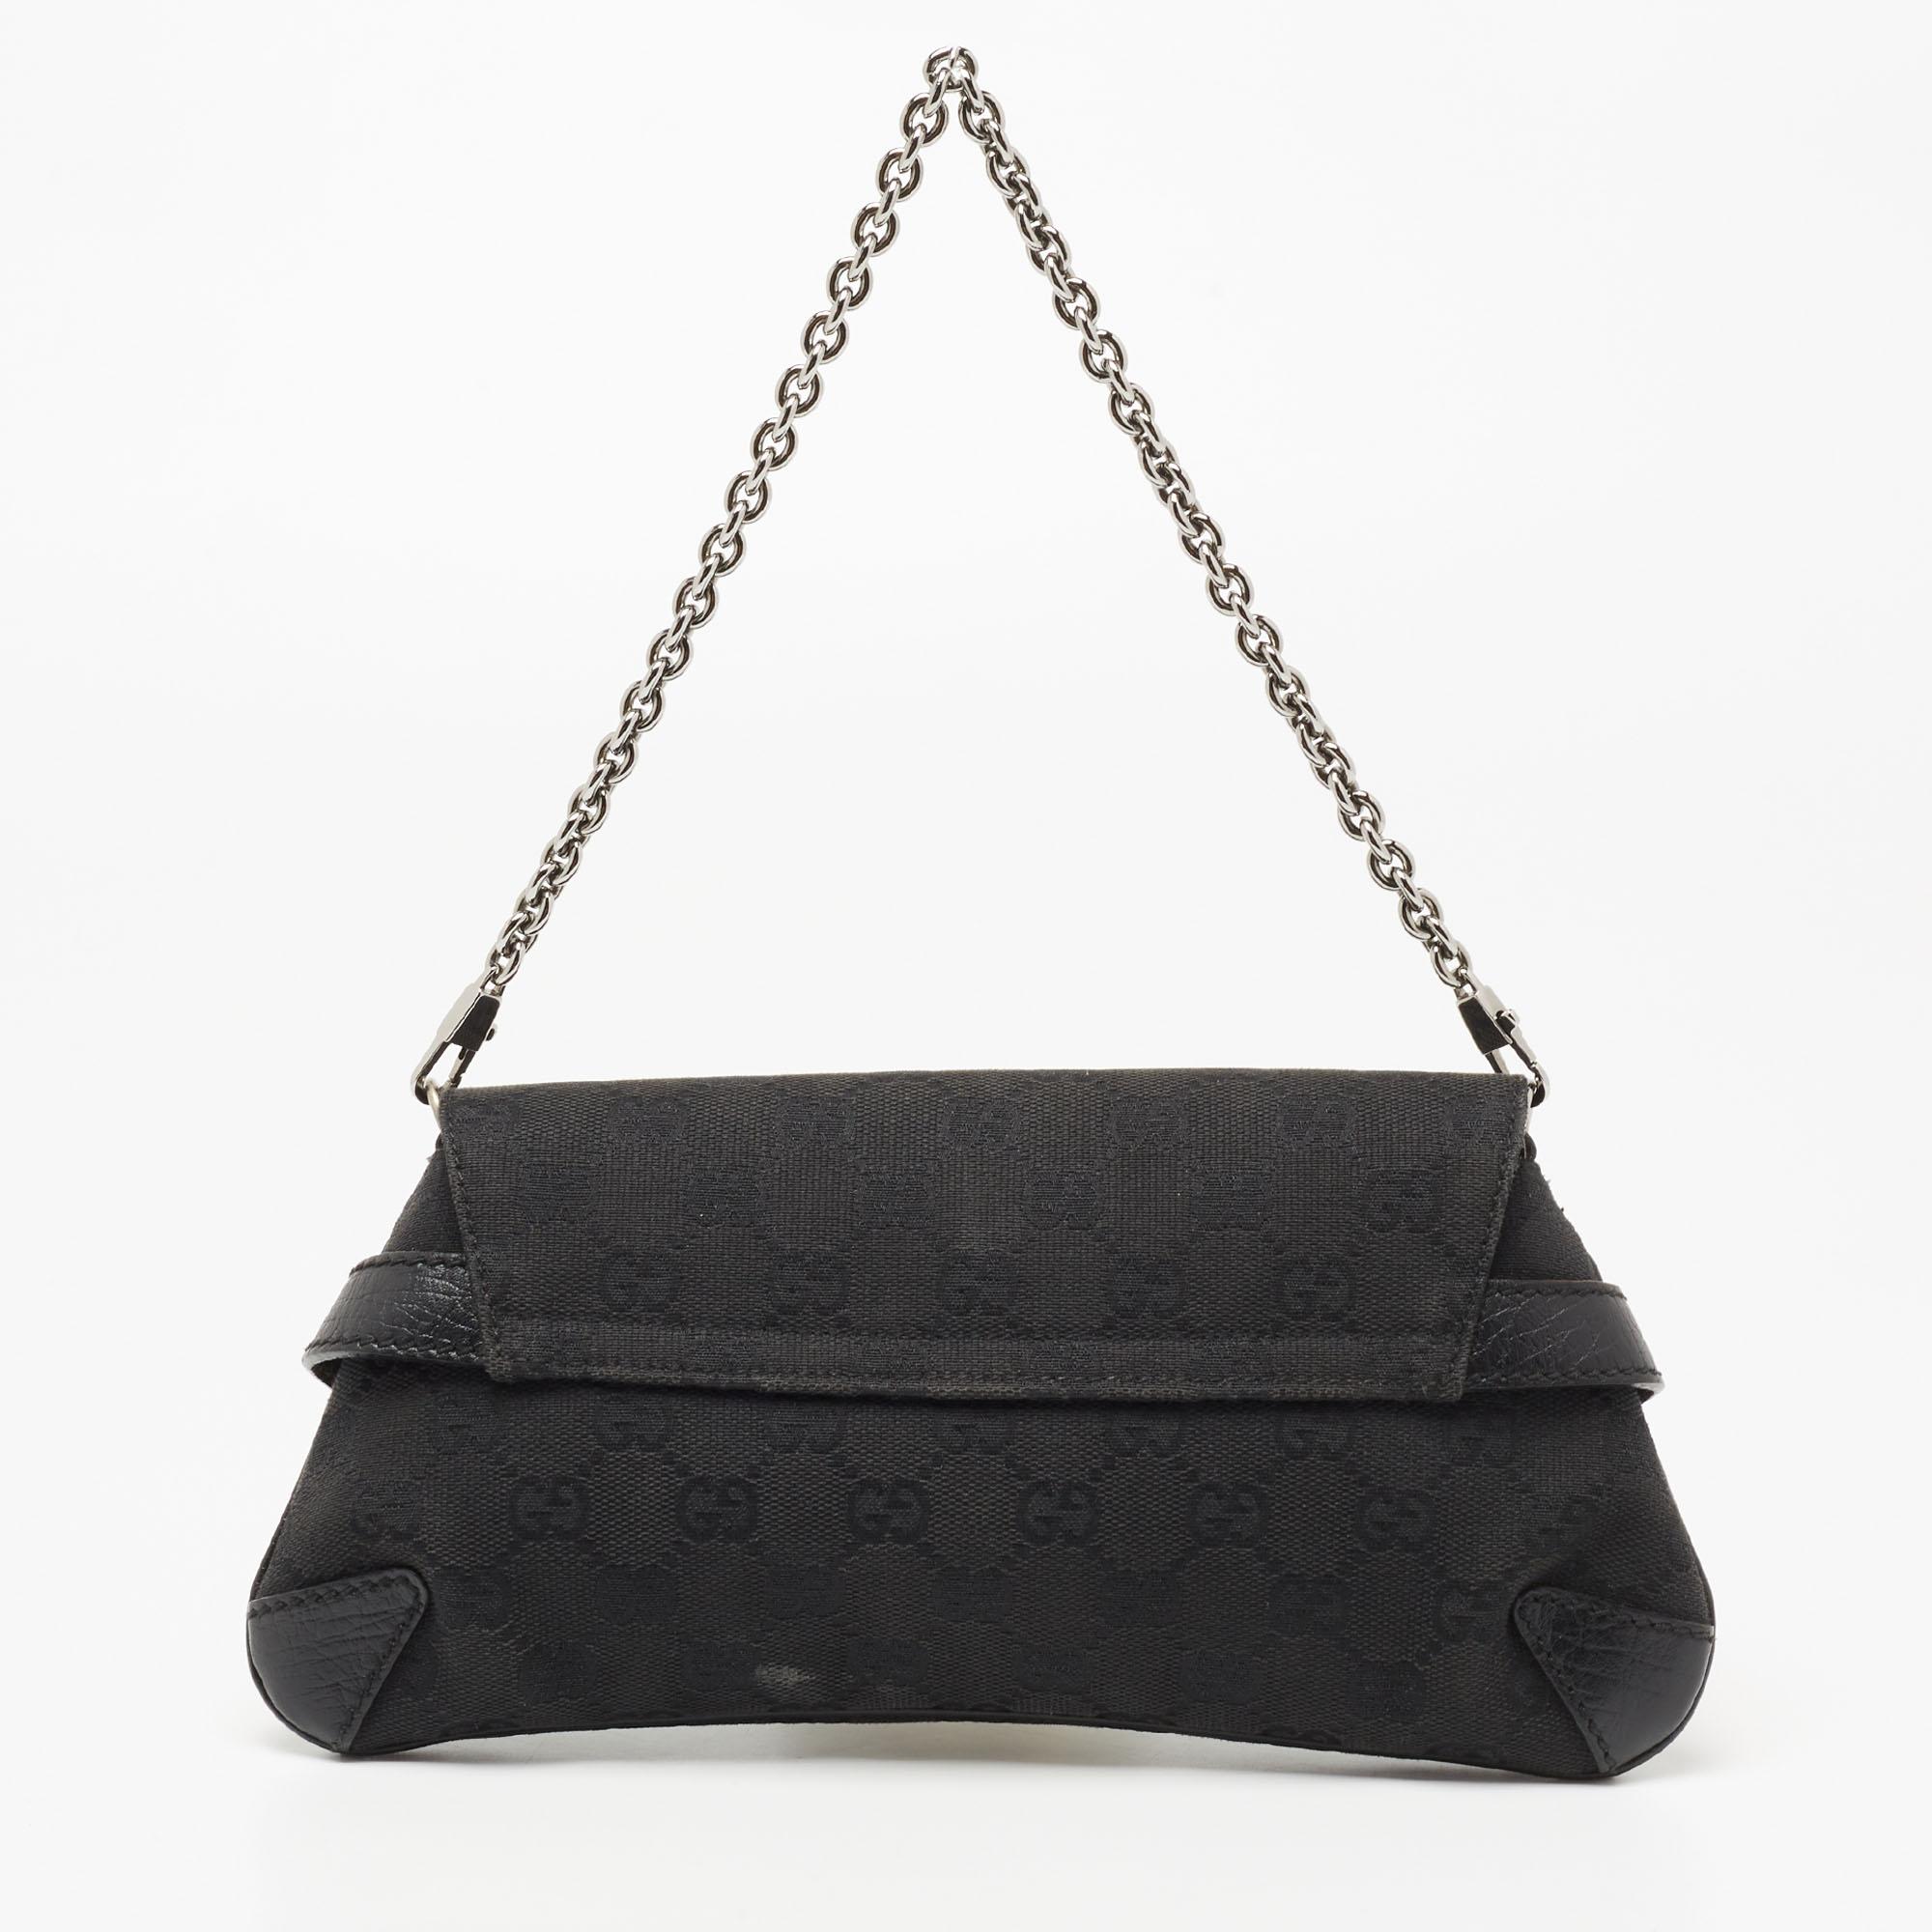 This clutch from the House of Gucci is a stylish creation that is exceptionally well-made. Crafted from black GG canvas, this clutch is embellished with a Horsebit motif on the front. It unveils a fabric-lined interior, which can easily fit your